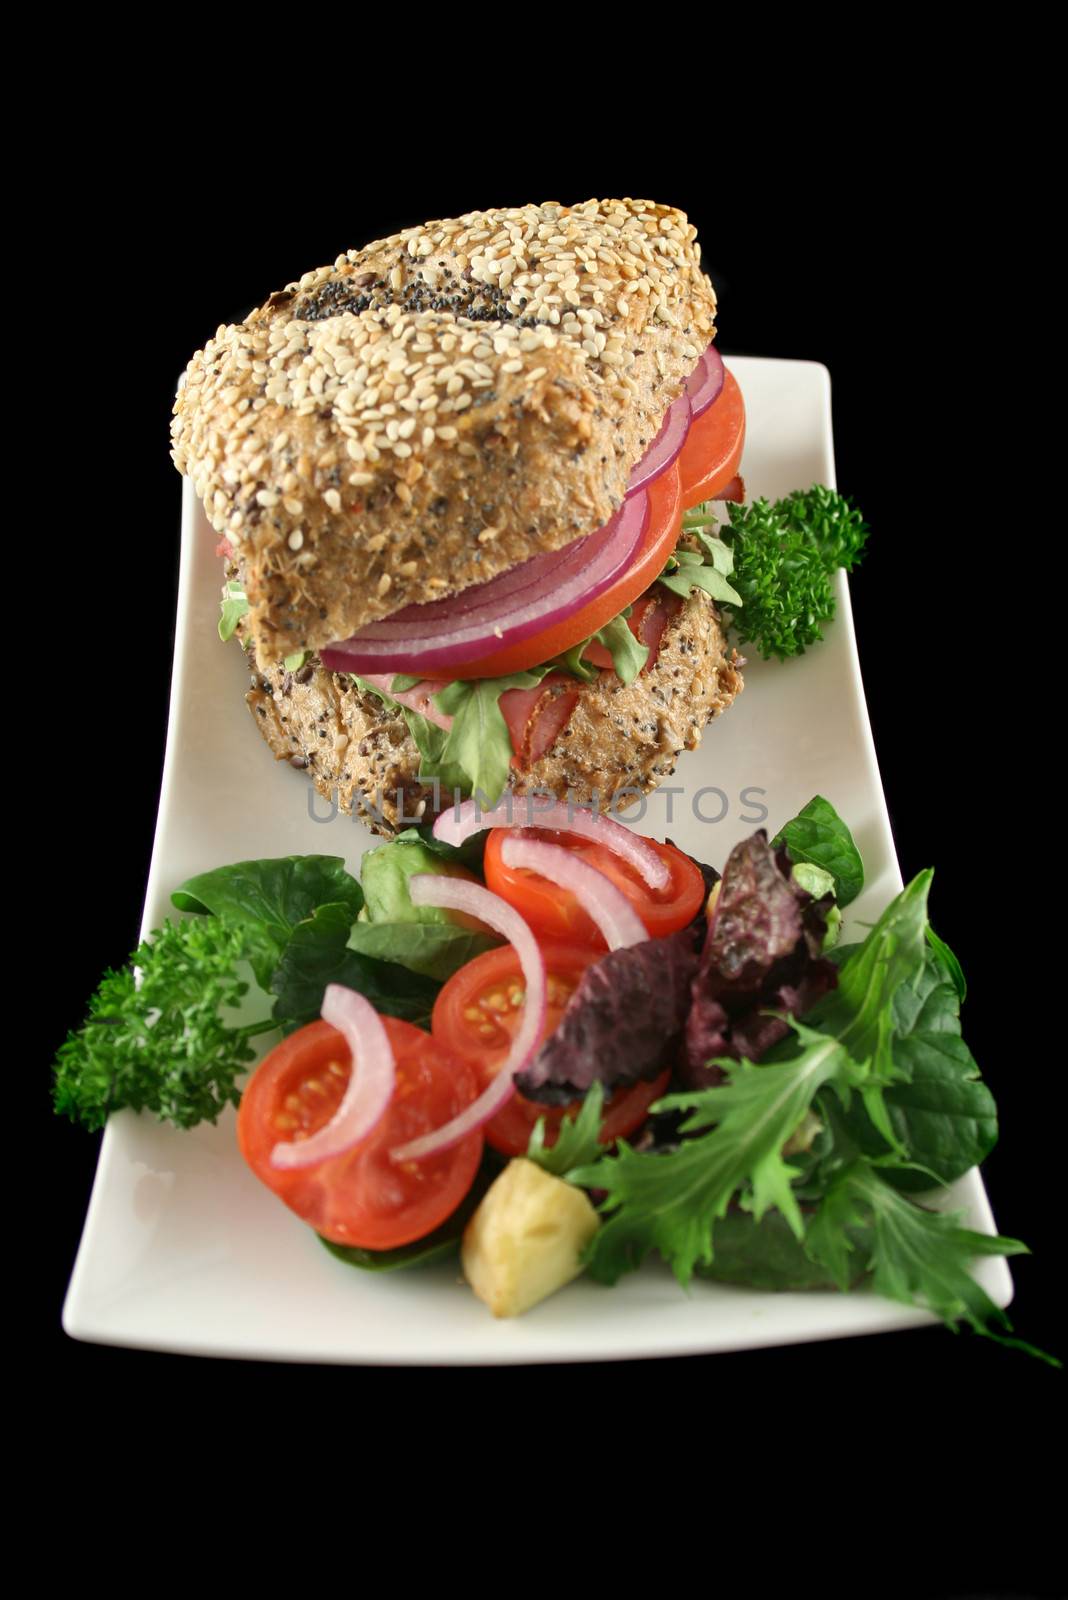 Pastrami and salad wholegrain seeded roll ready to serve.